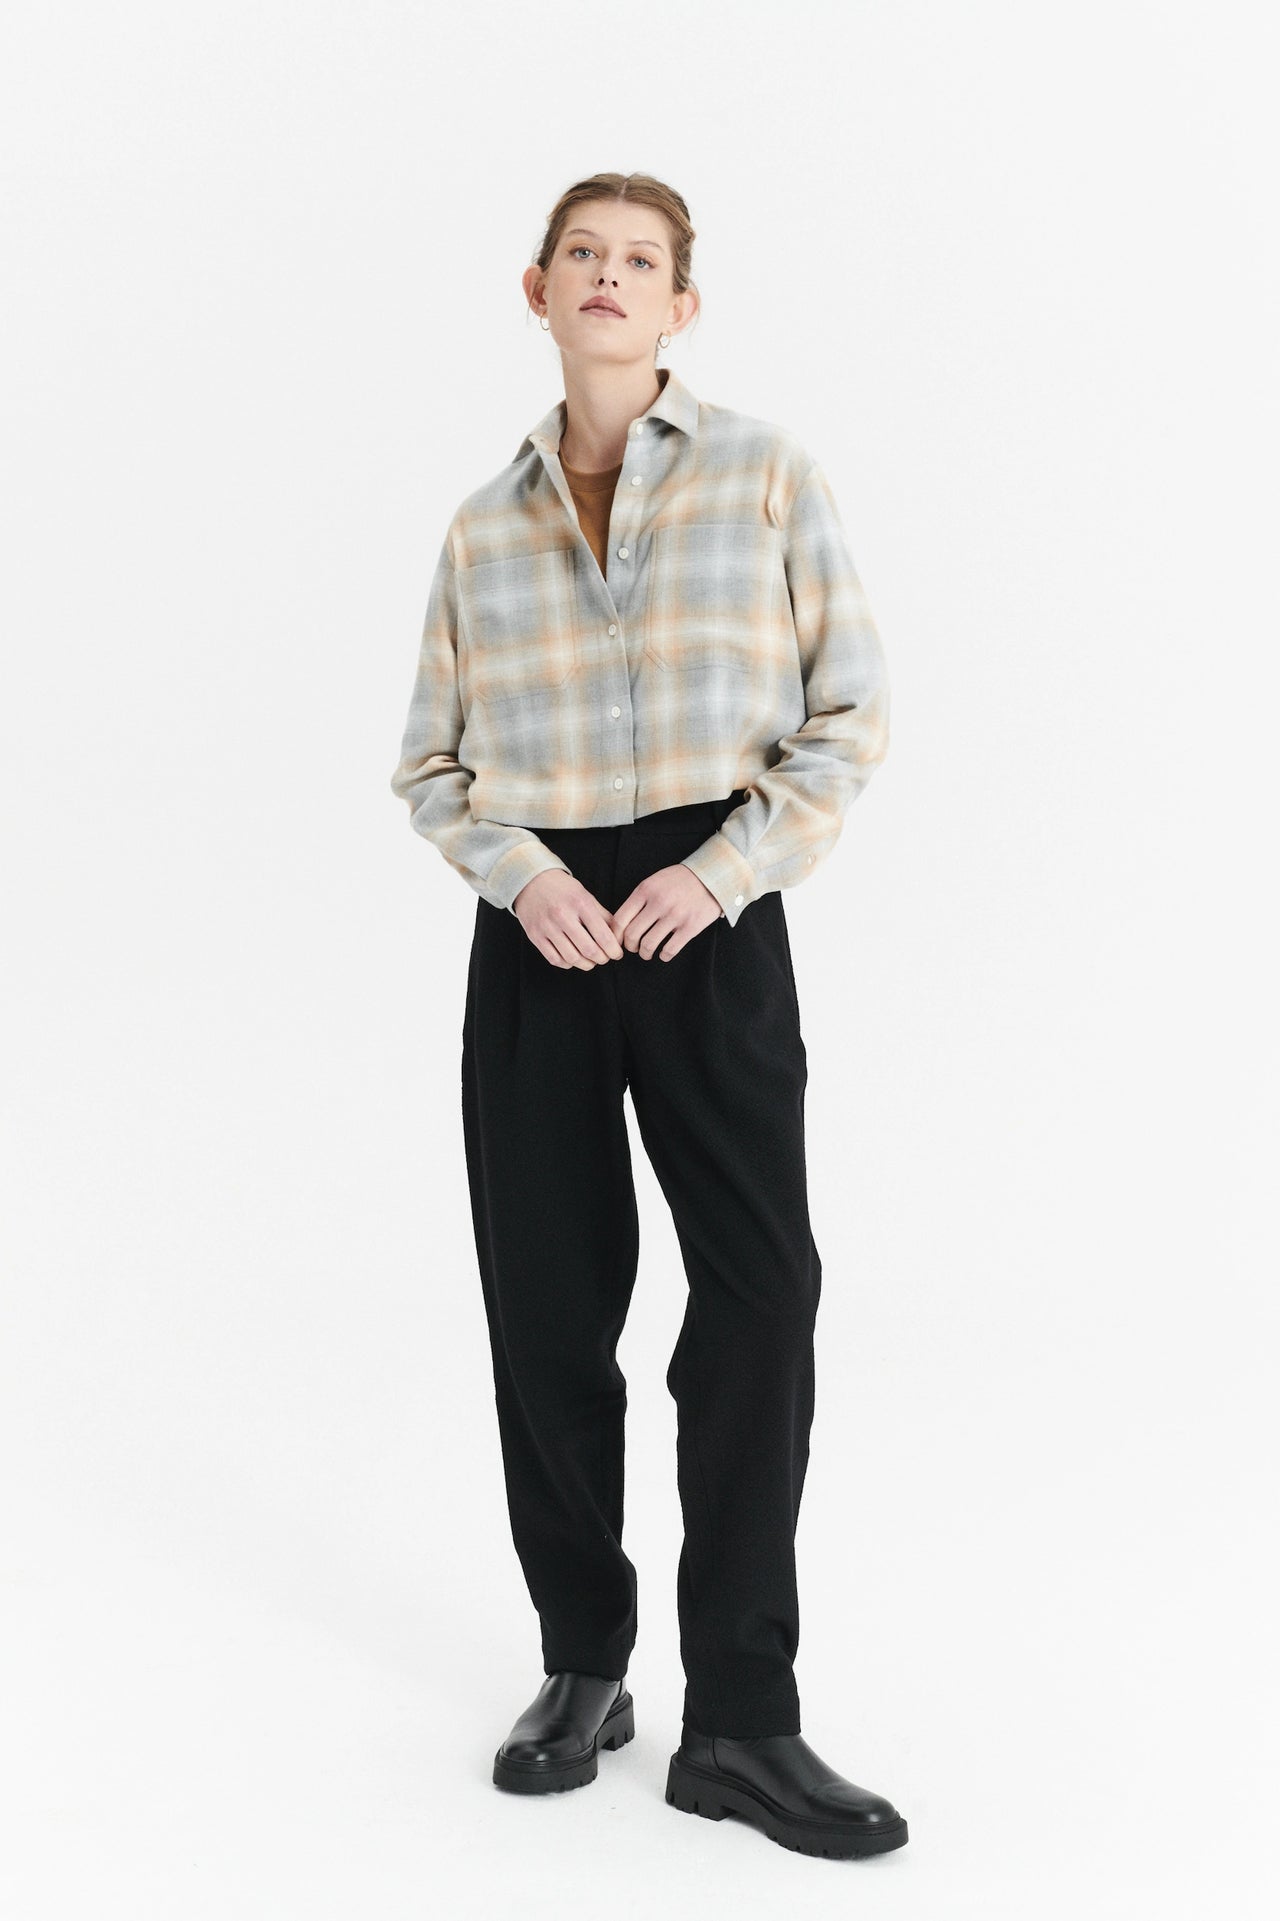 Cropped Shirt in a Soft Tonal Beige and Grey Chequered Italian Cotton Flannel